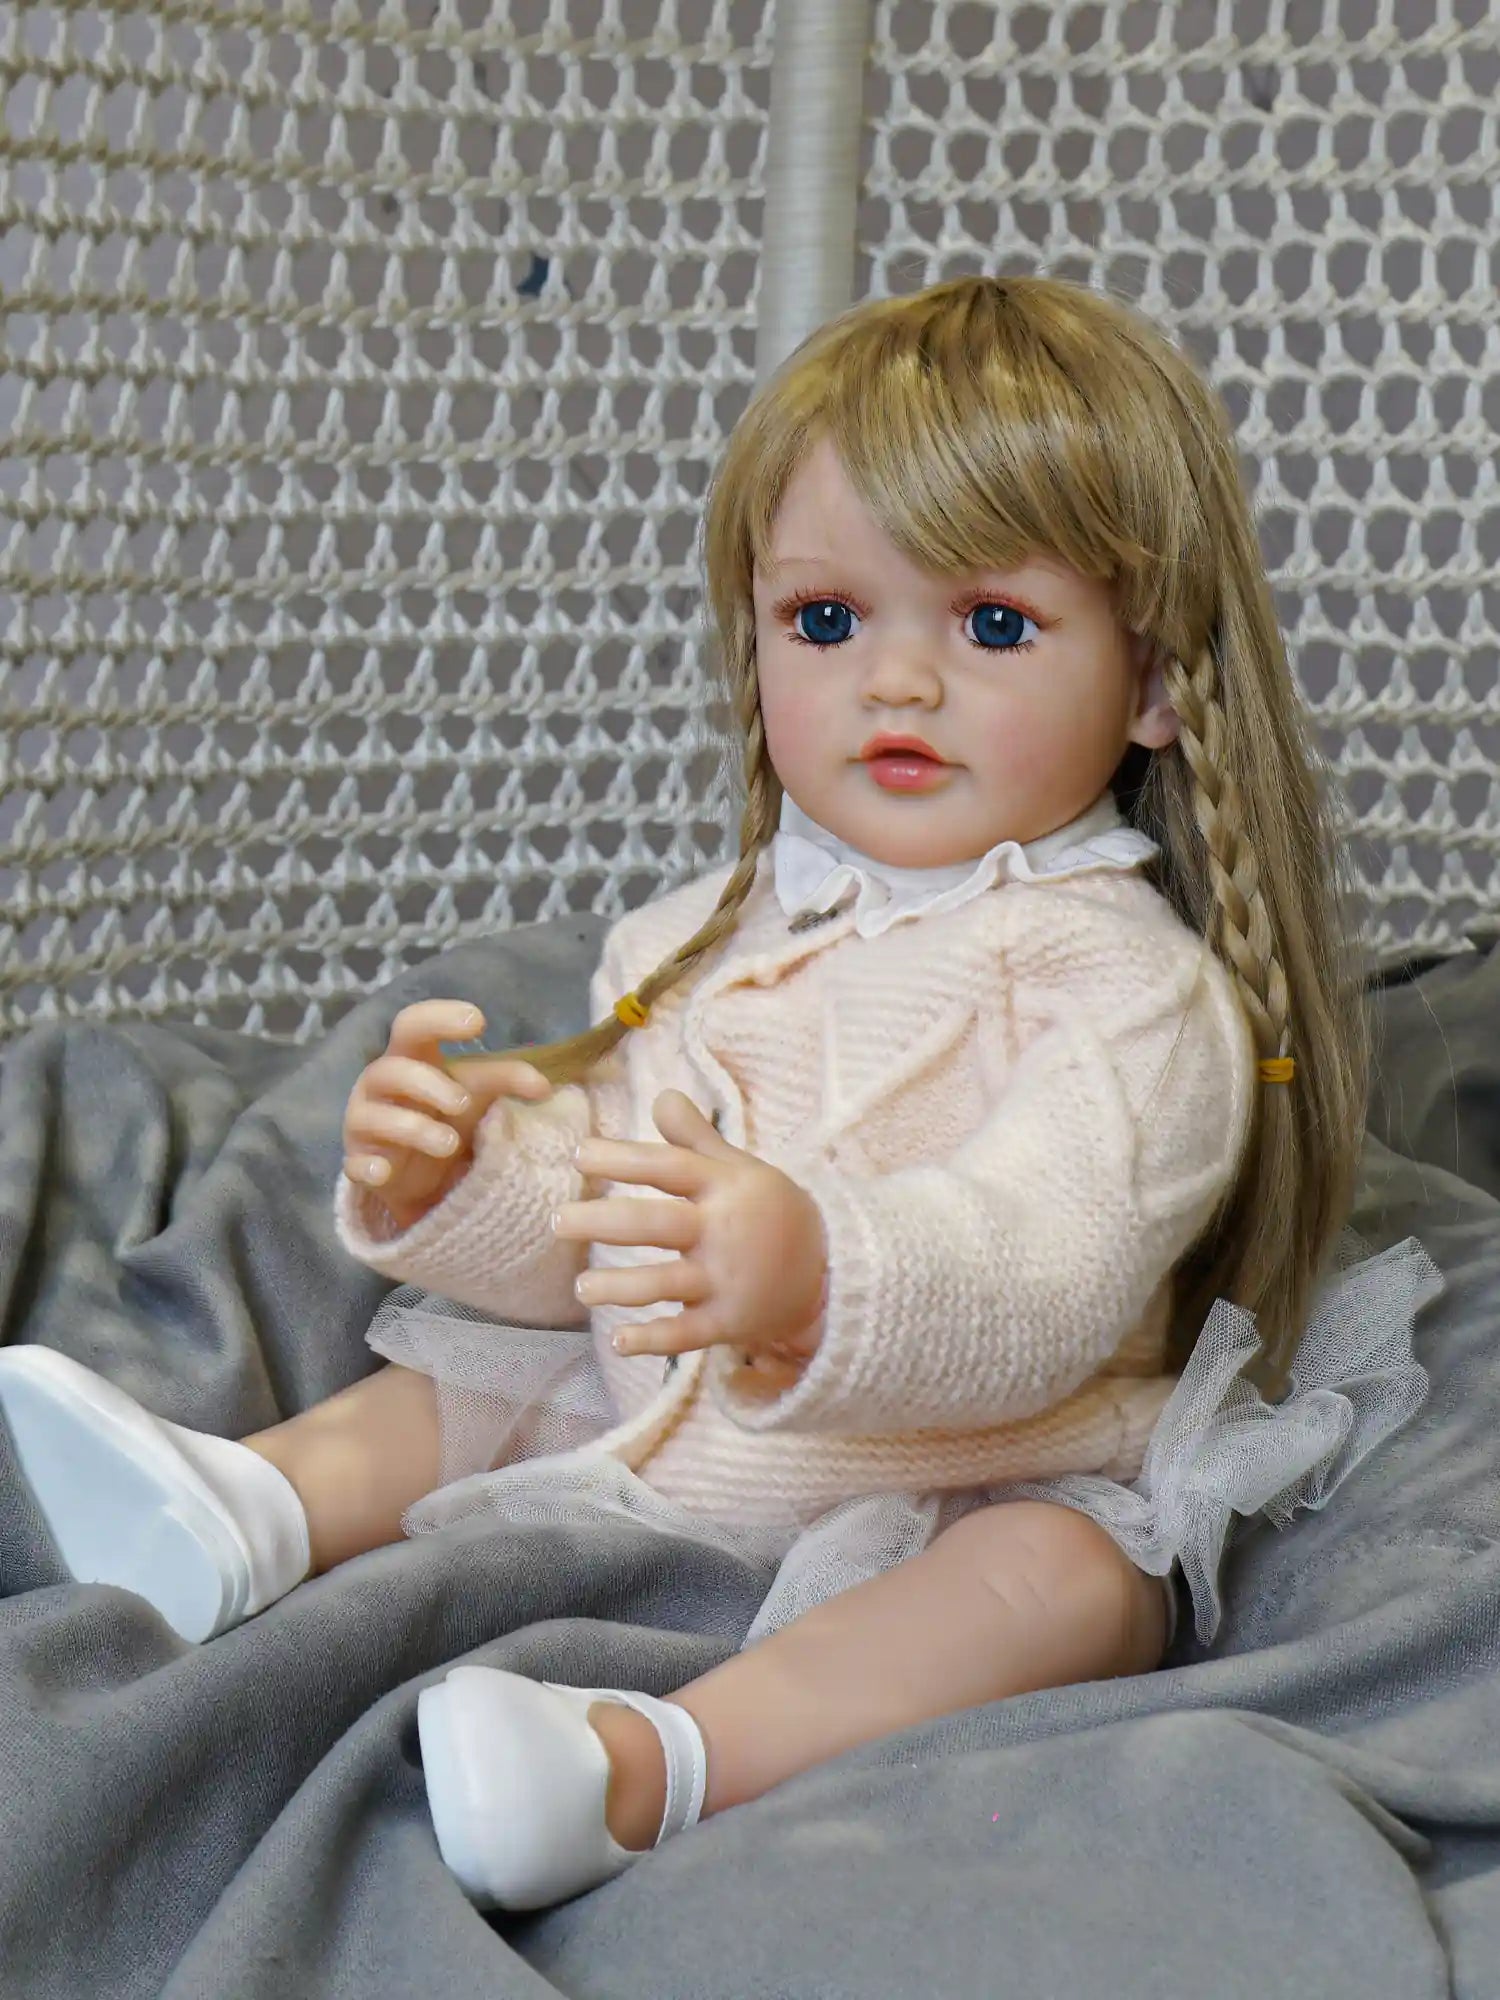 Cozy up with our reborn doll, ready for a story or a cuddle with her soft, knitted attire and inviting blue eyes.